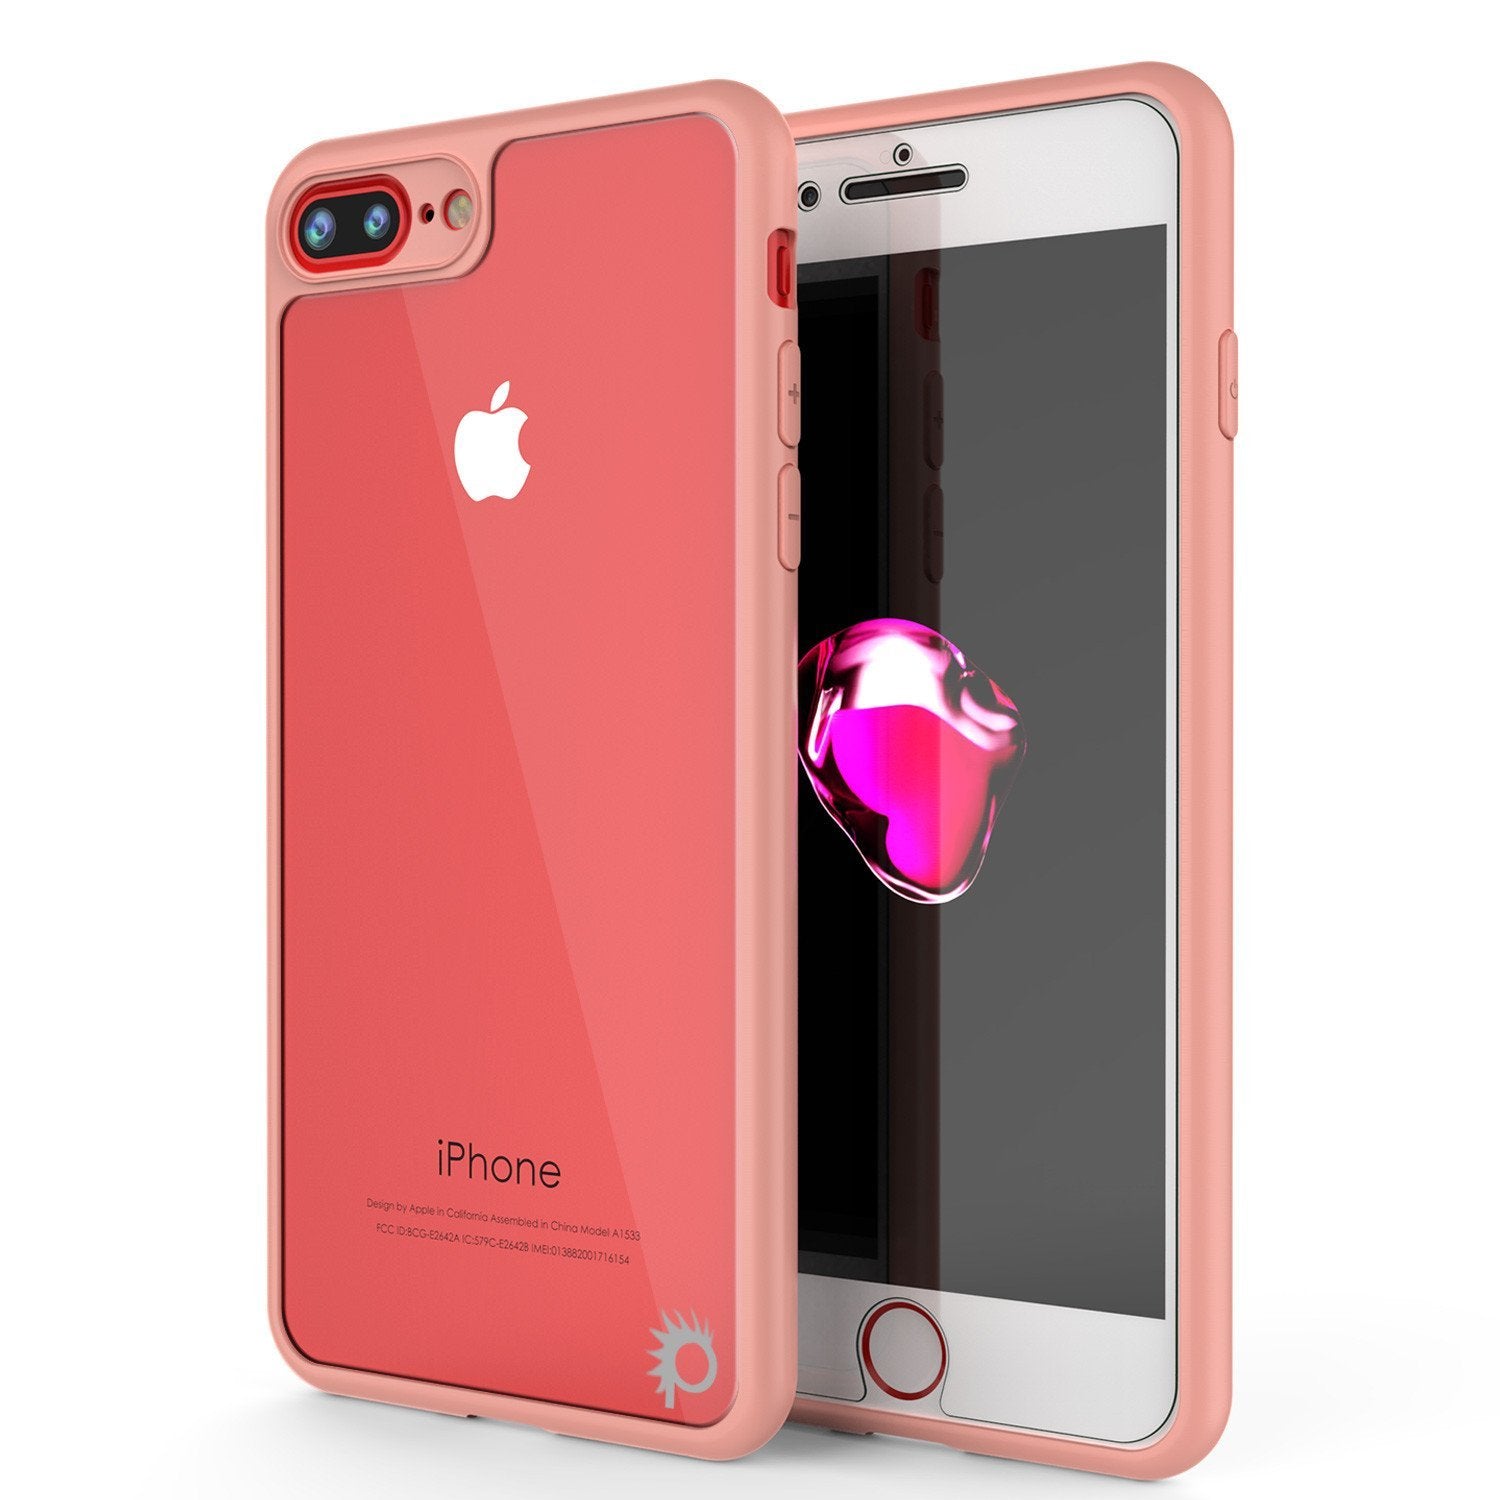 iPhone 8+ Plus Case [MASK Series] [PINK] Full Body Hybrid Dual Layer TPU Cover W/ protective Tempered Glass Screen Protector